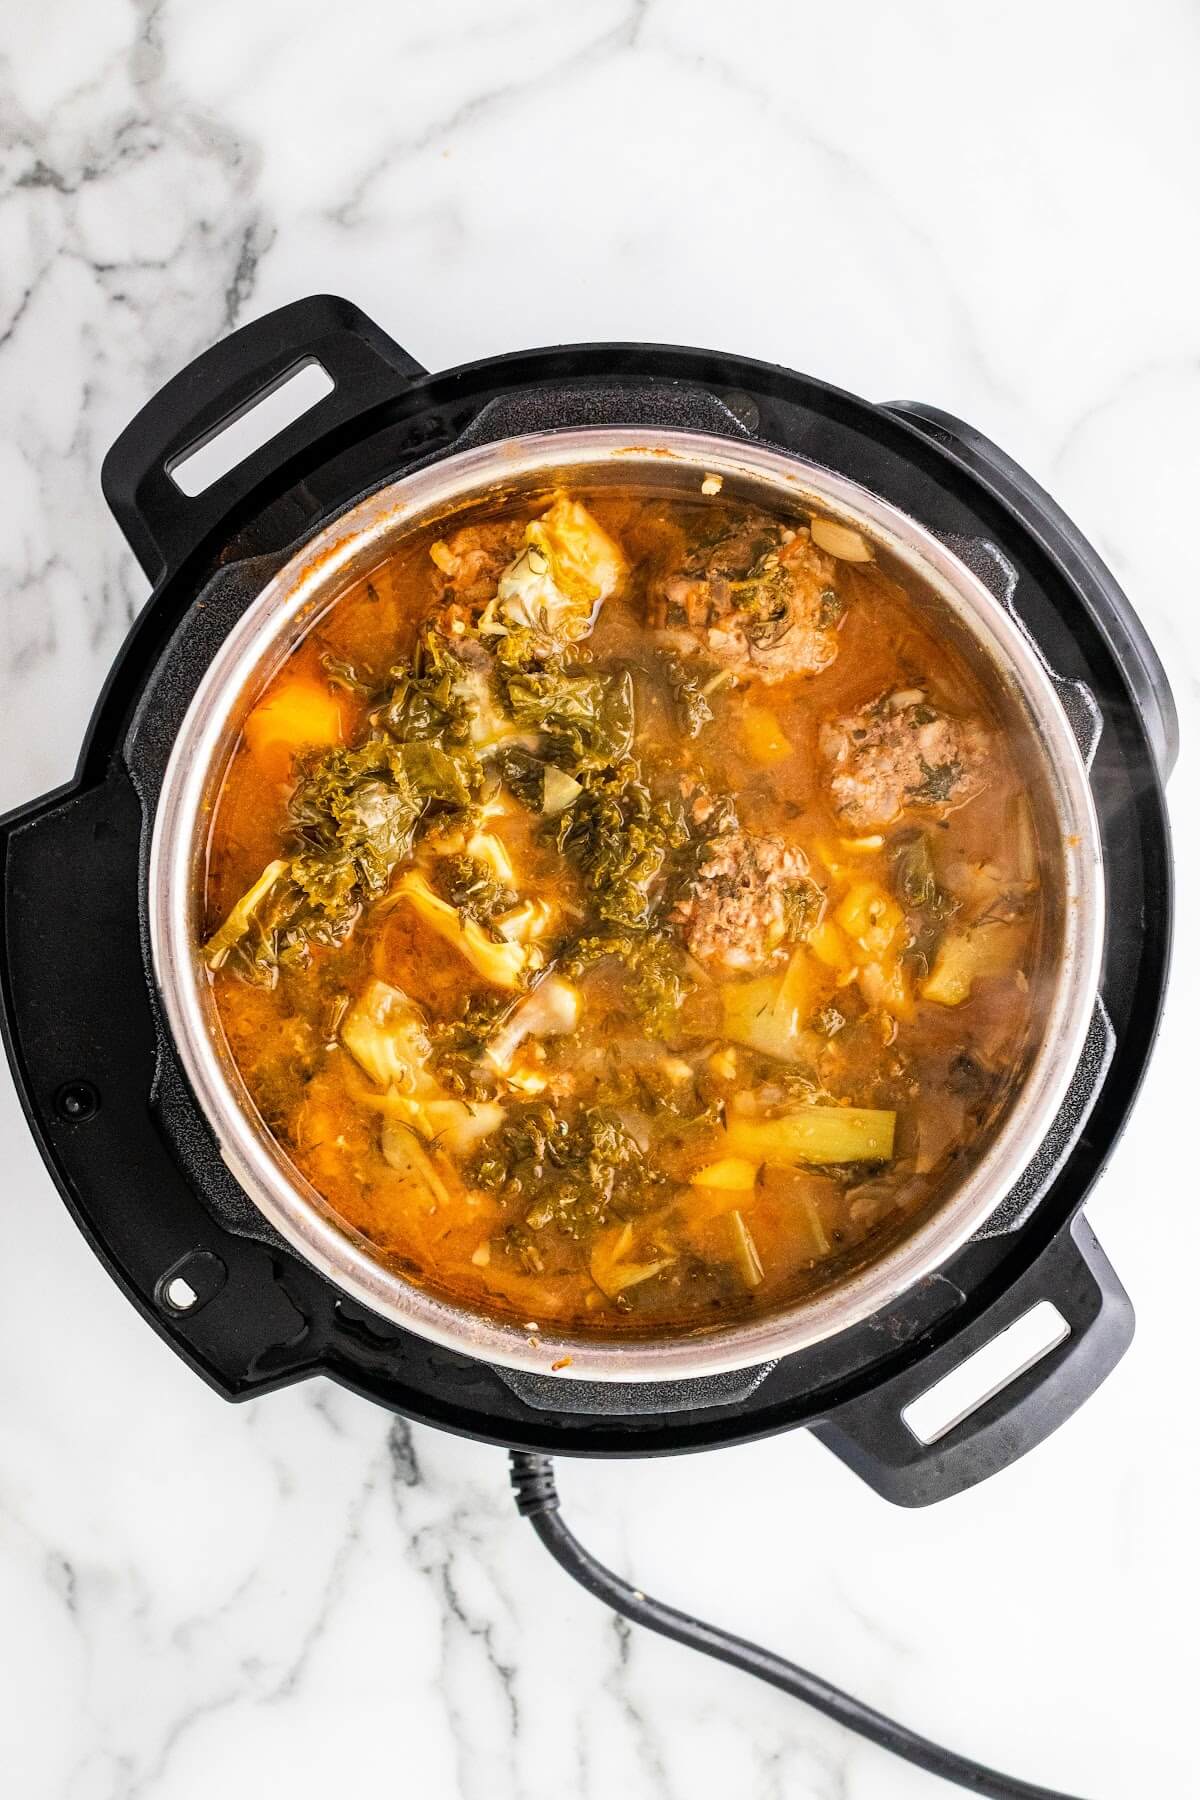 Overhead shot of an Instant Pot with a cooked broth soup with vegetables and meatballs.